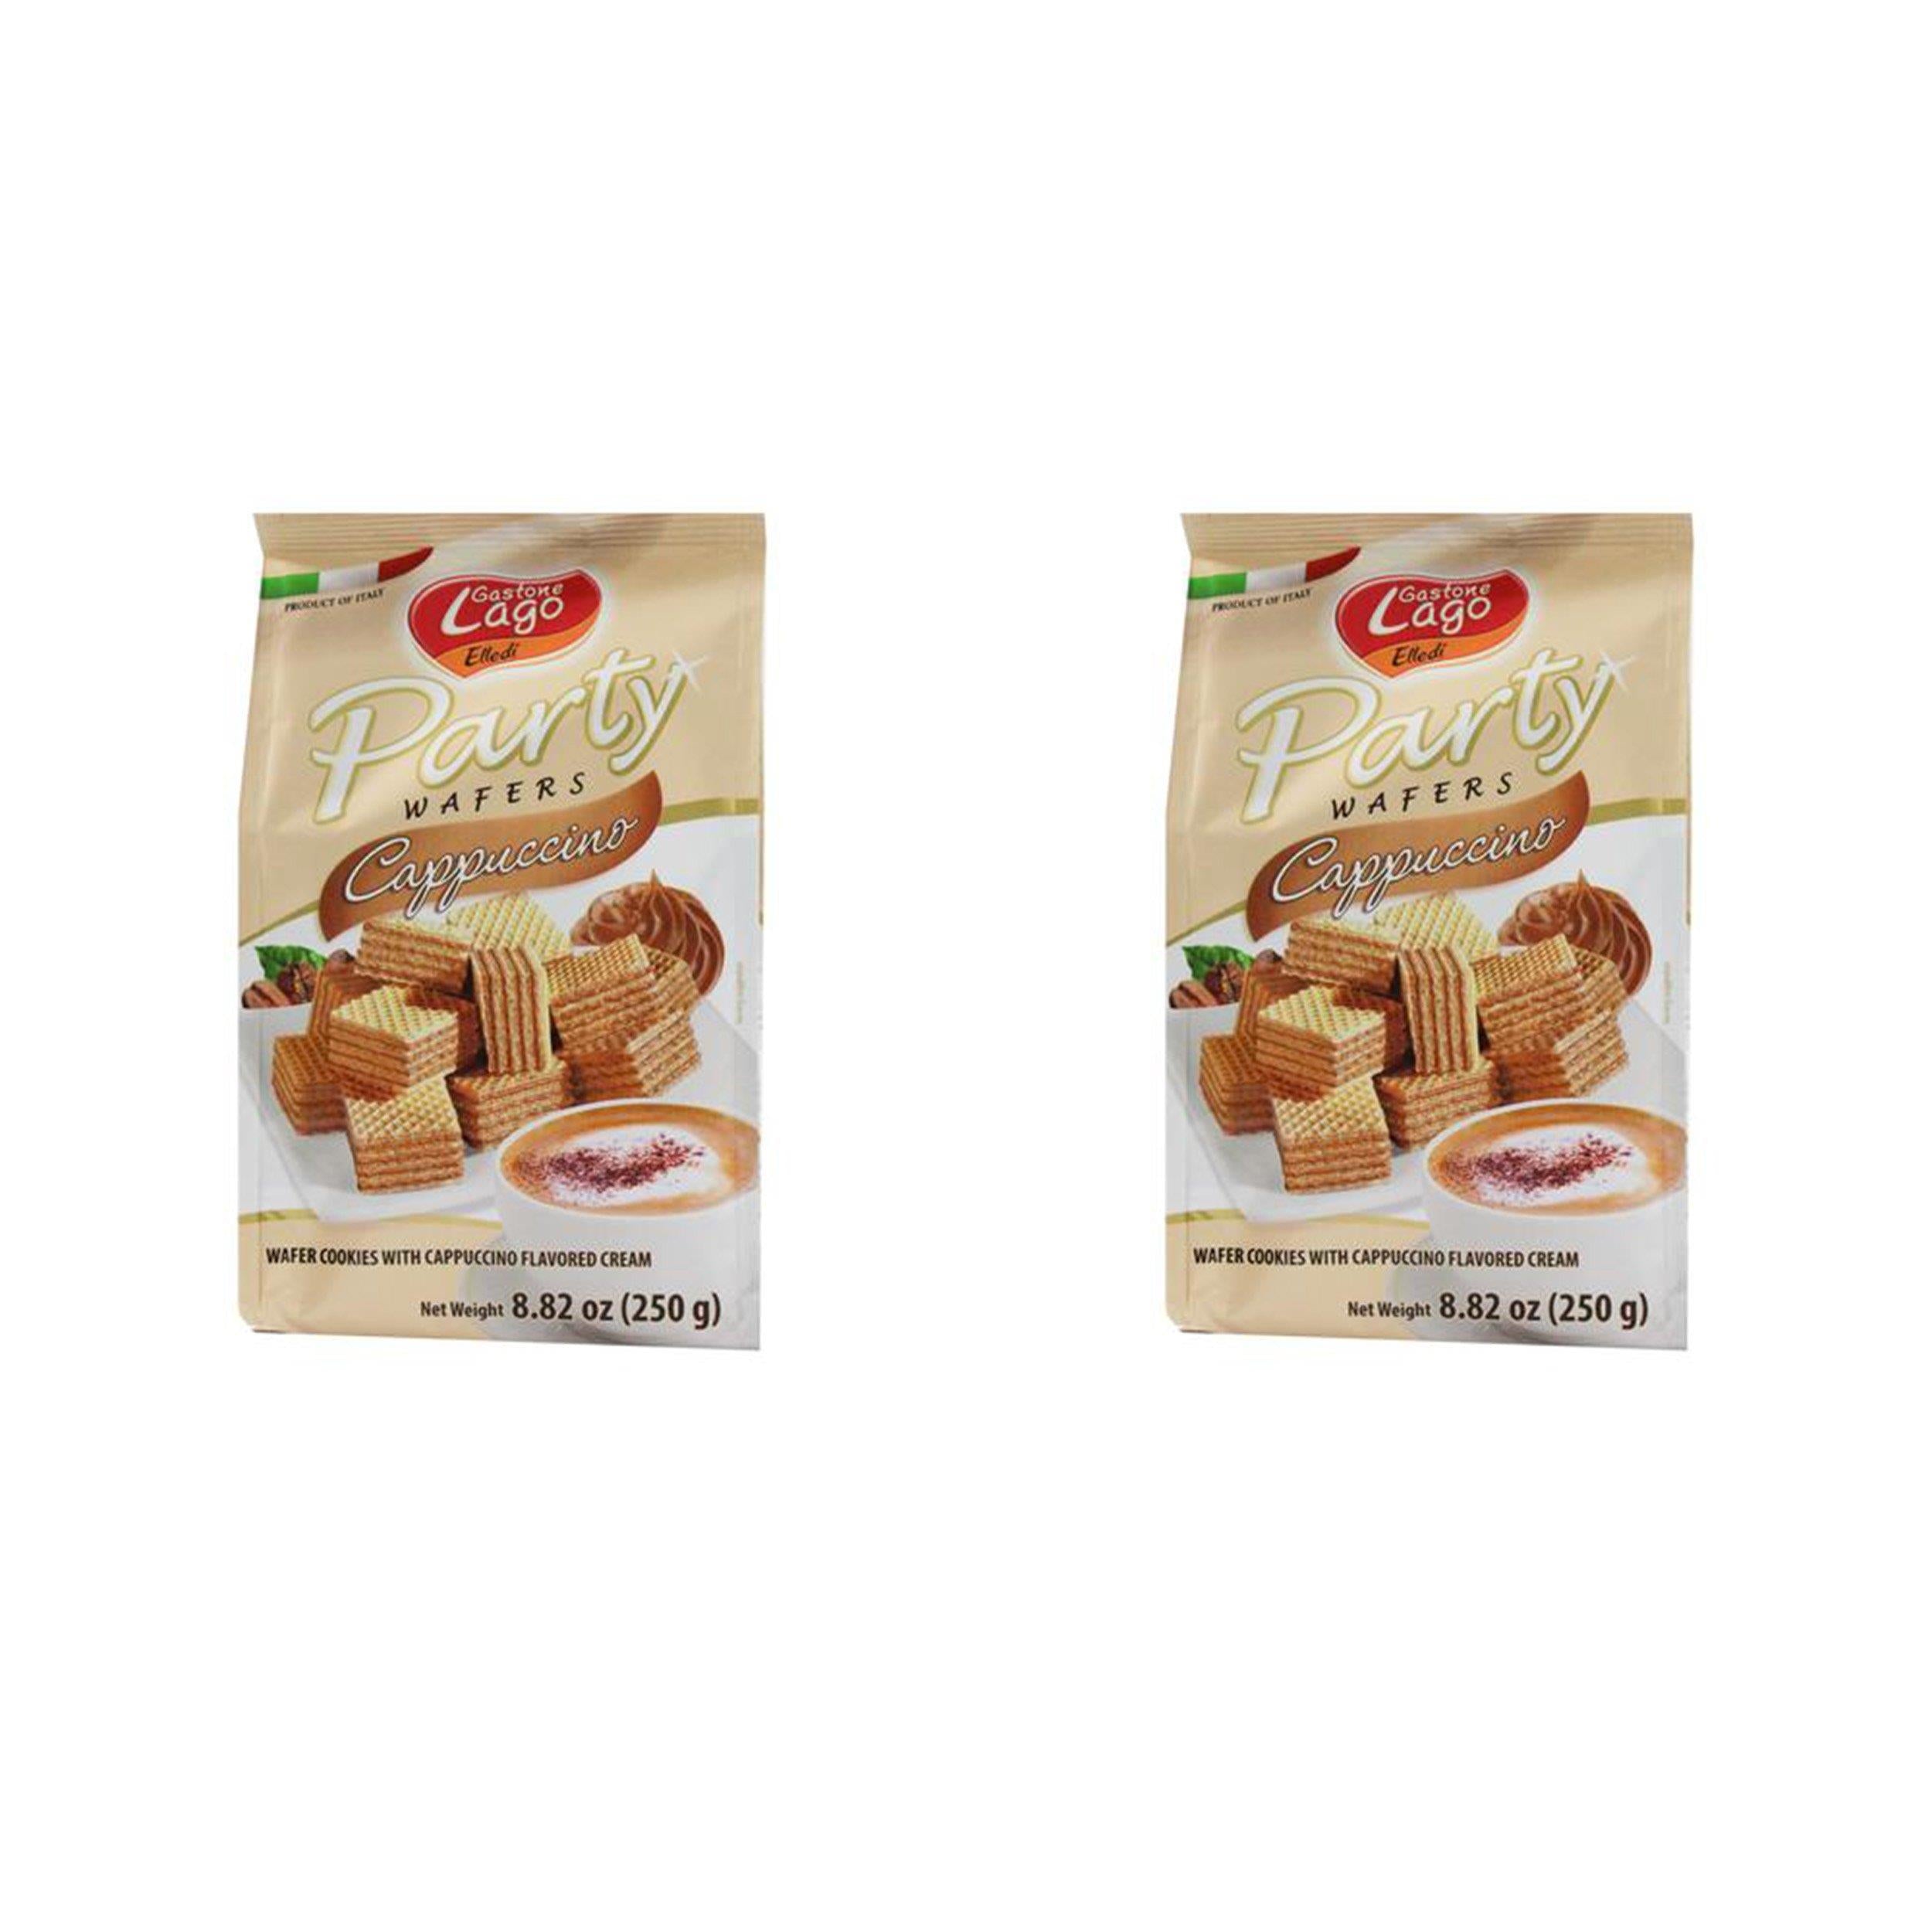 Gastone Lago Party Wafers Cappuccino Cream Filling 8.82 oz, 250g (Pack of 2)